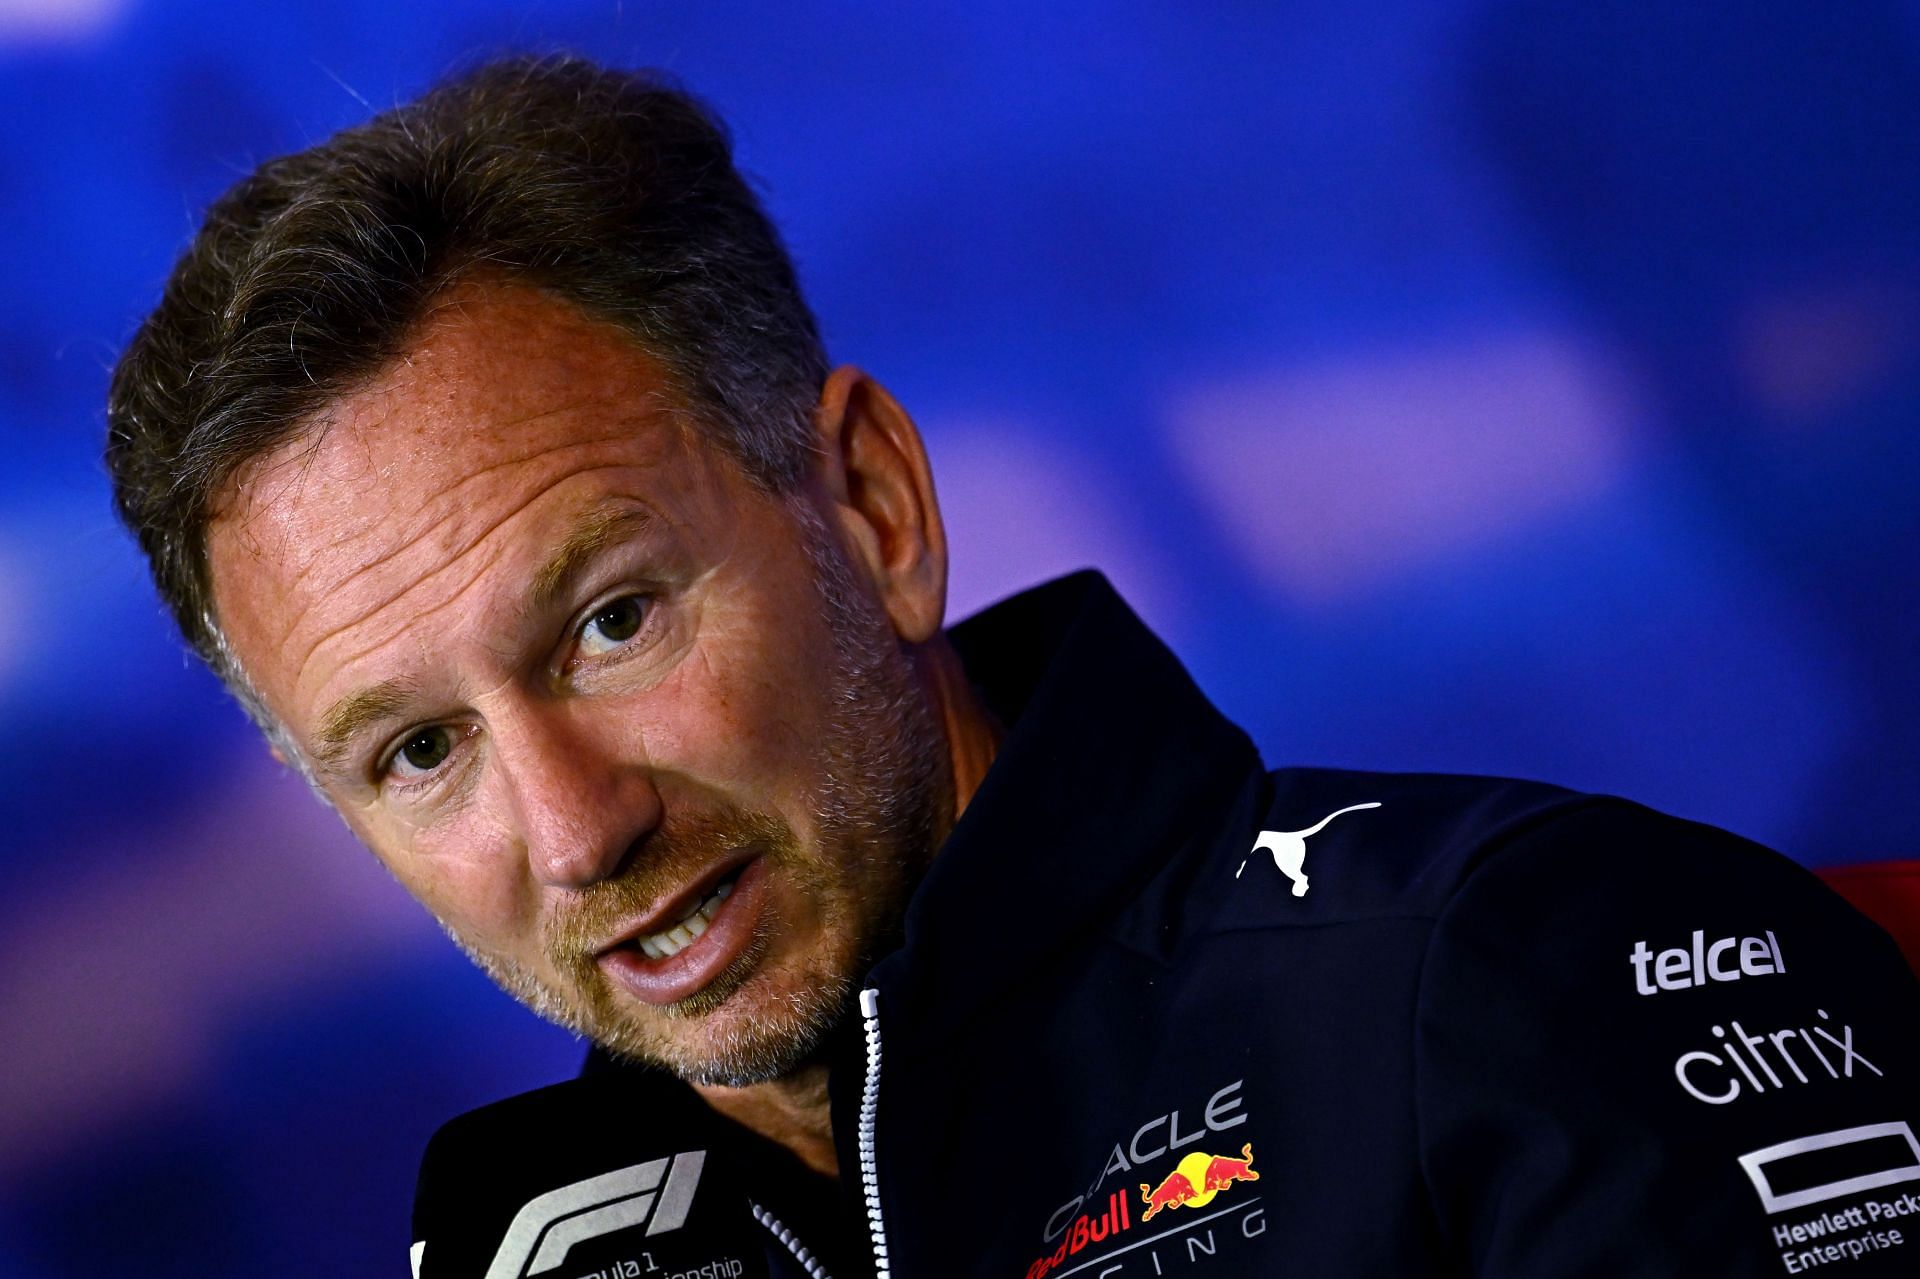 Christian Horner has attributed F1&rsquo;s growing popularity to the increased polarization among fans